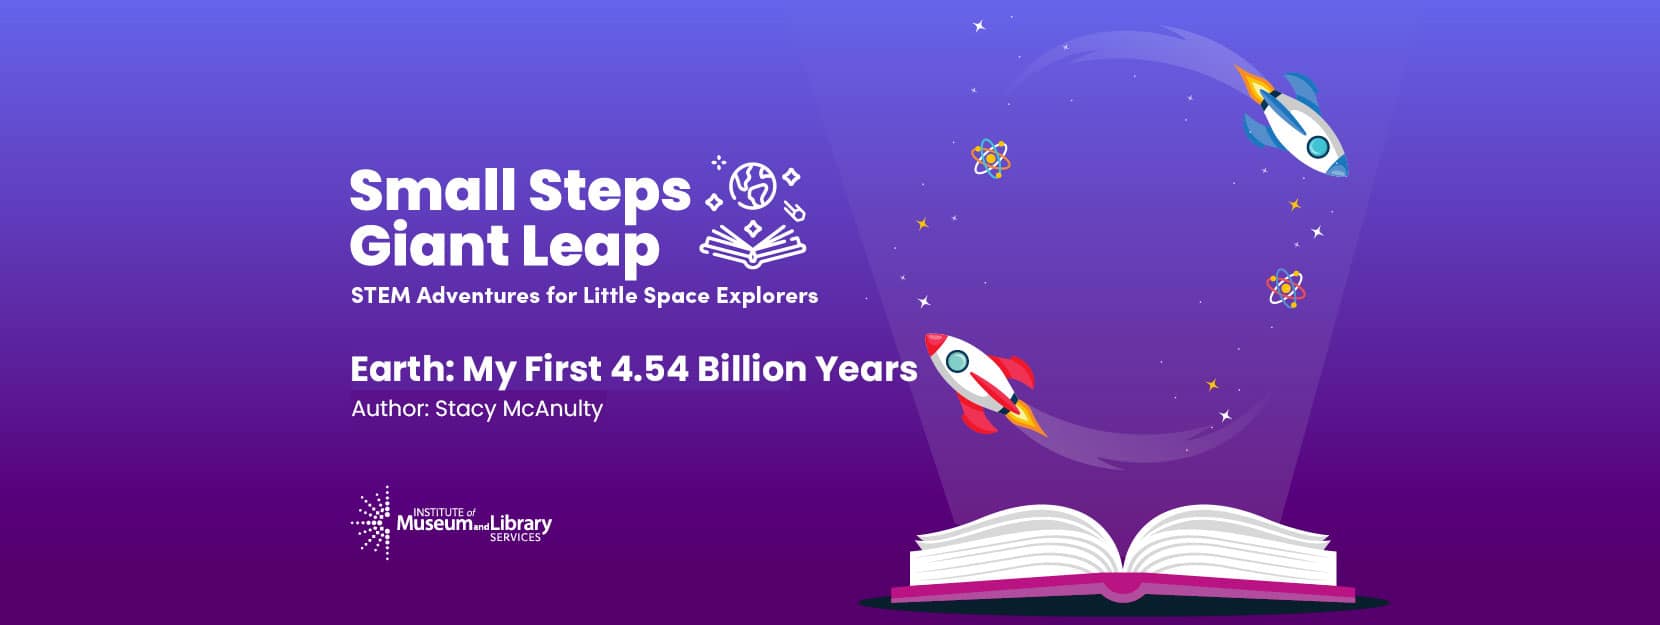 Small Steps Giant Leap